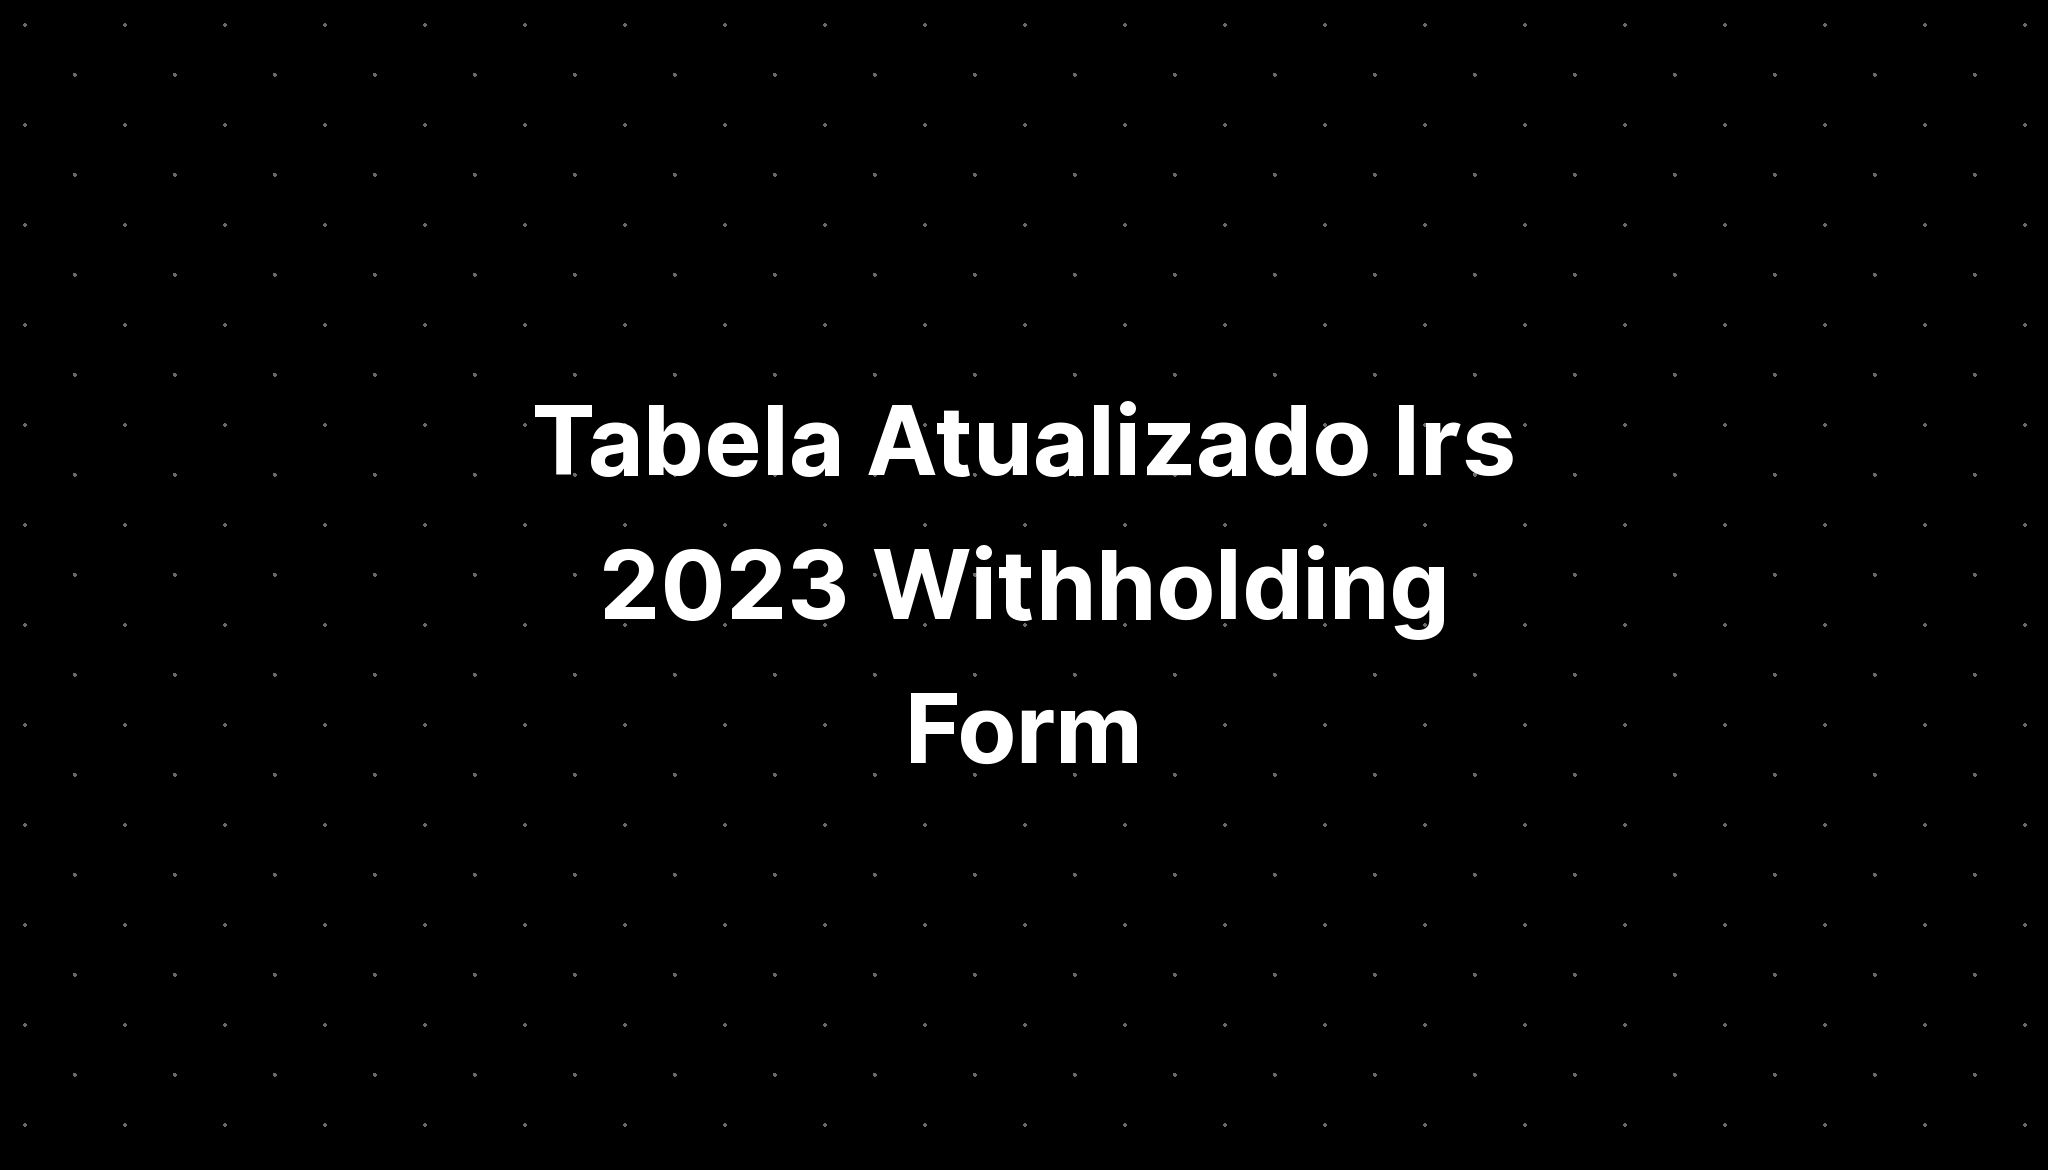 Tabela Atualizado Irs 2023 Withholding Form Imagesee 7136